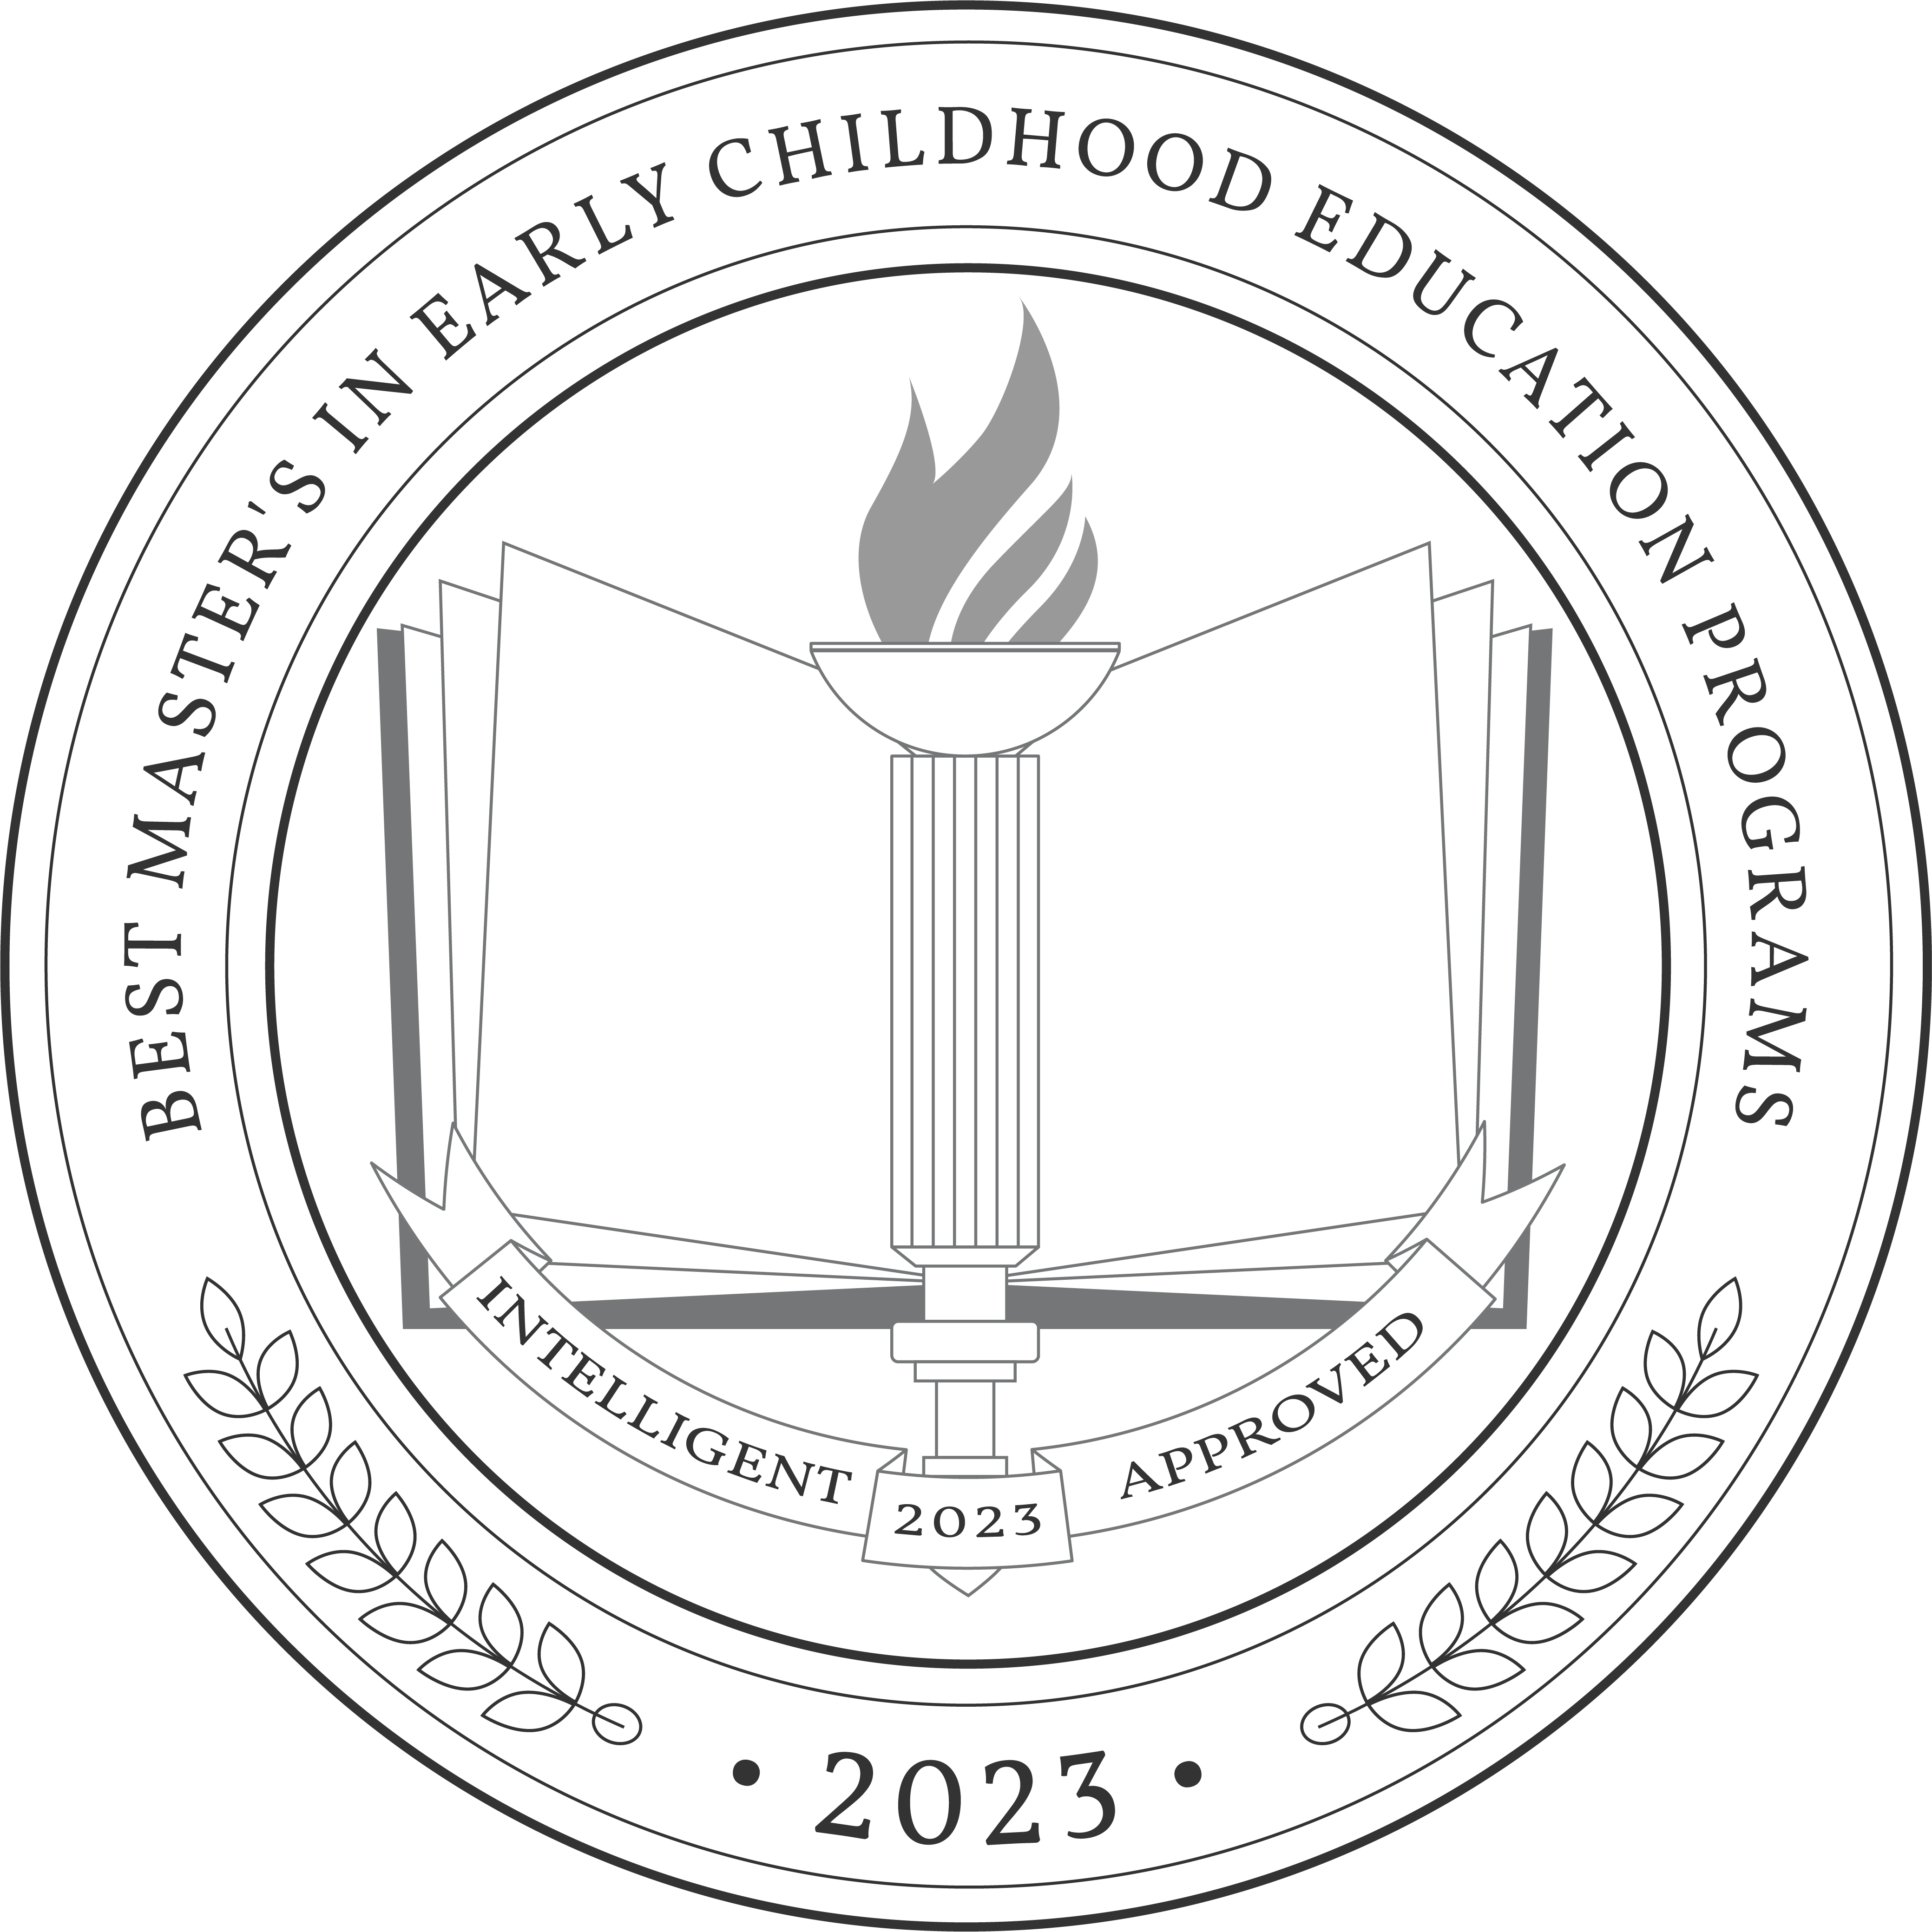 Best Master's in Early Childhood Education Programs 2023